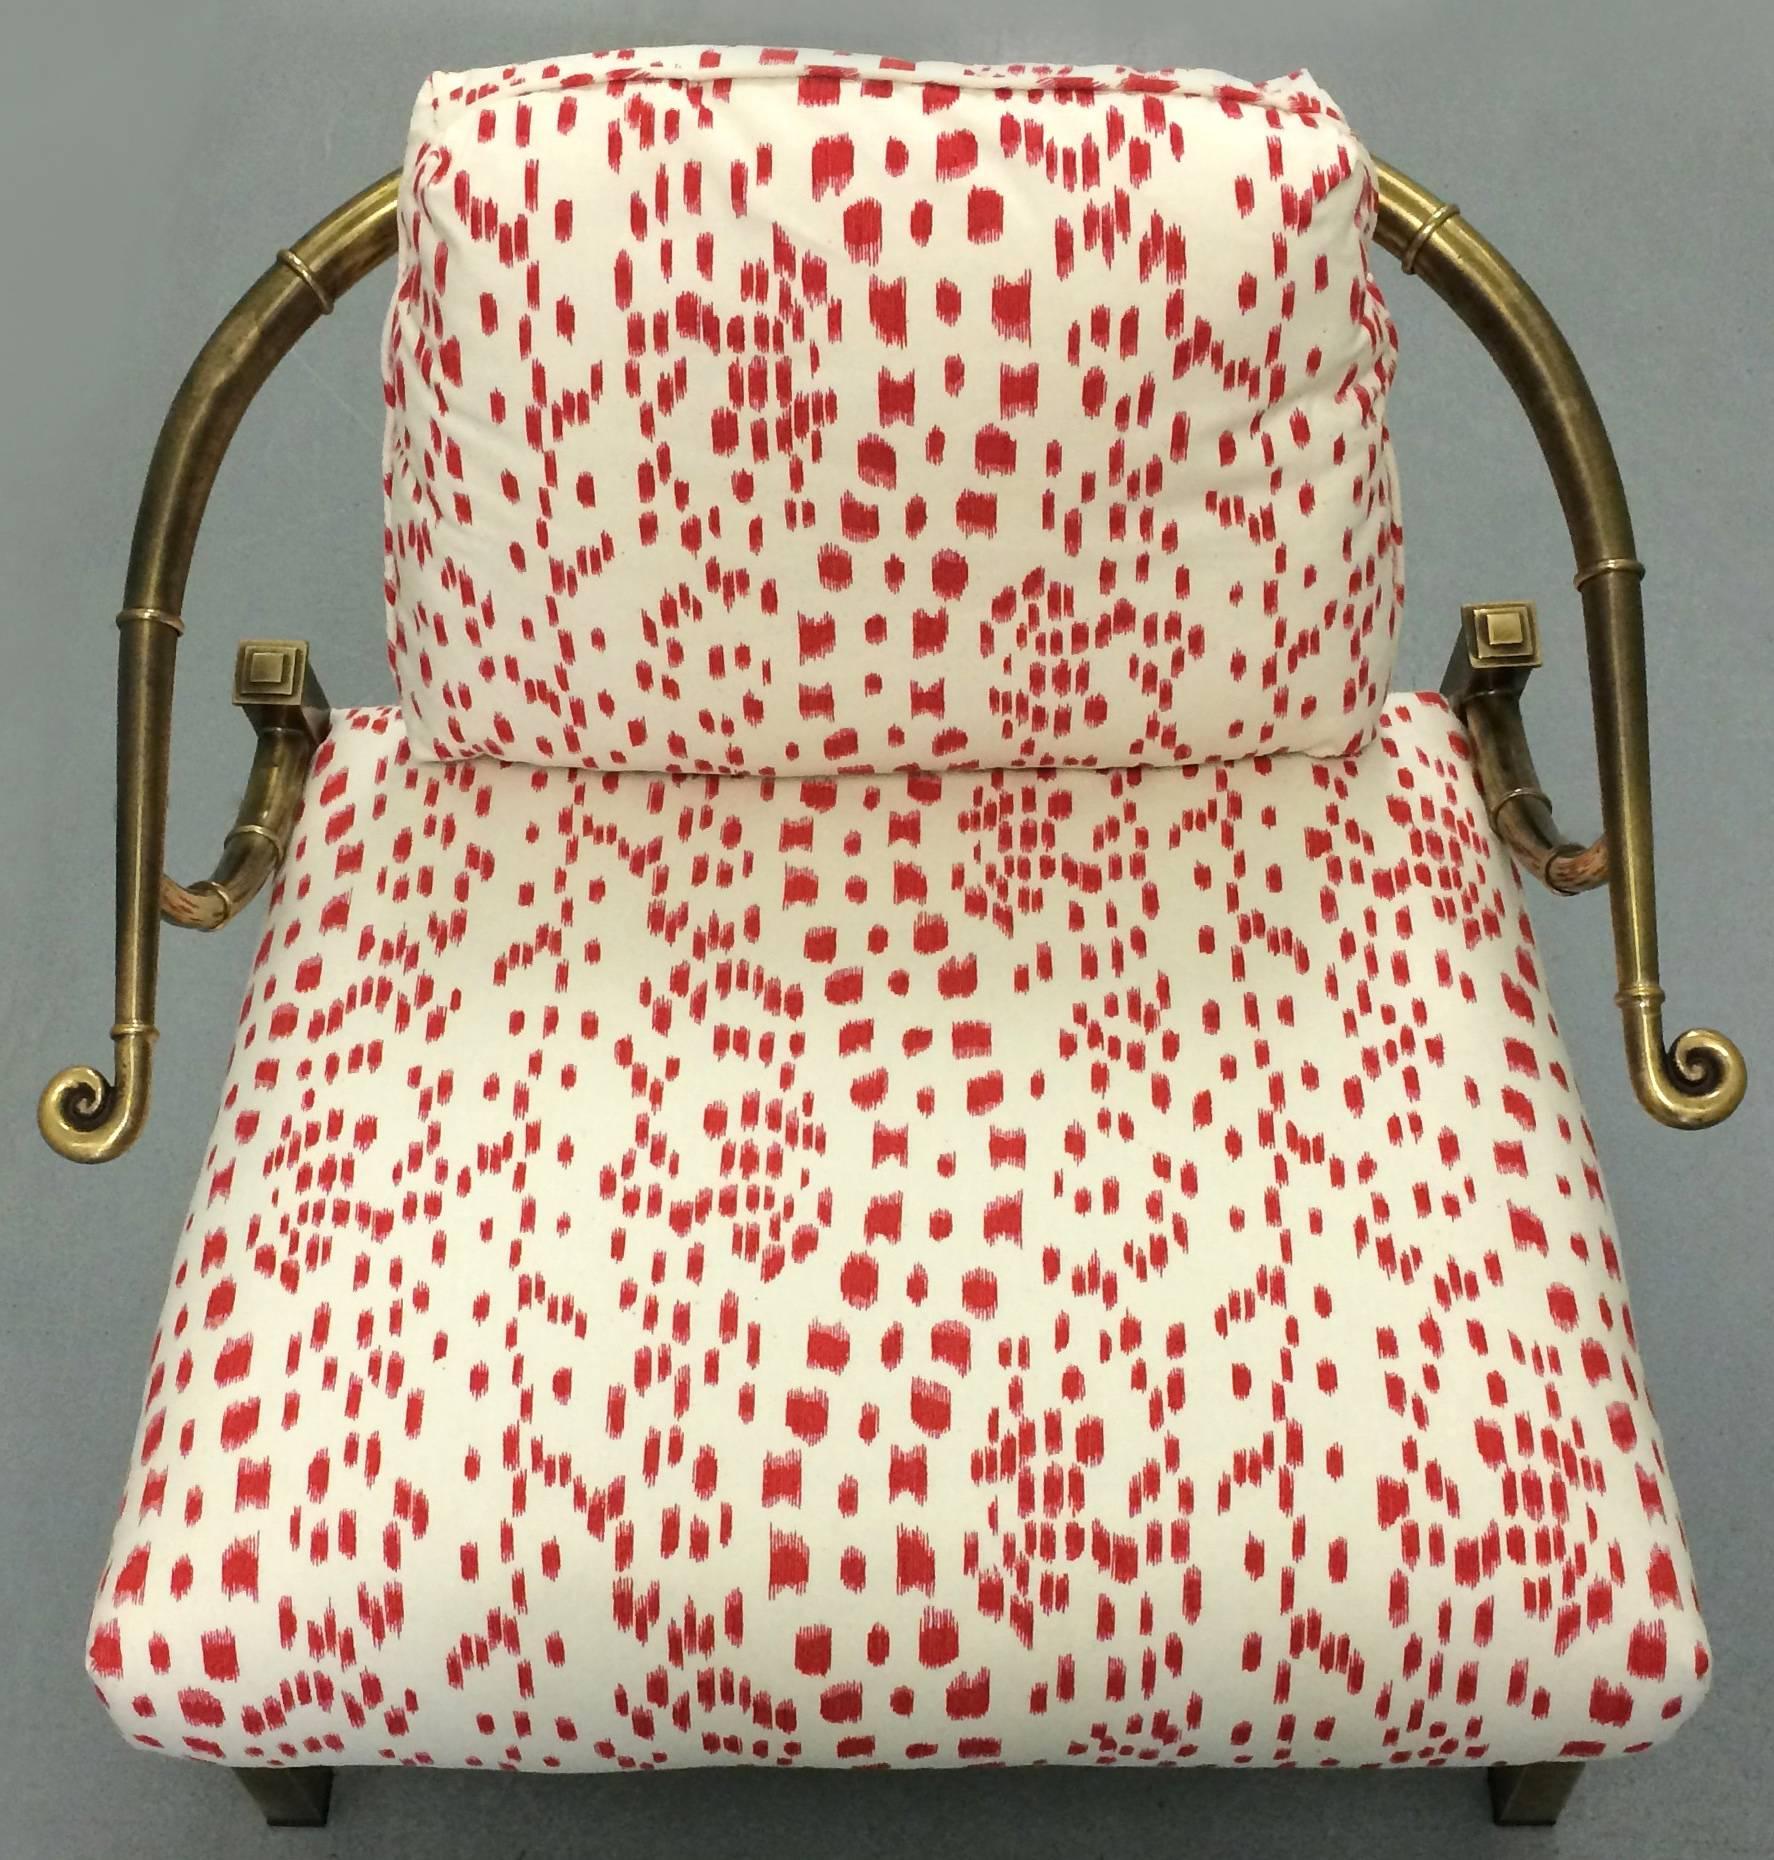 1970s chinoiserie brass horseshoe chair by Mastercraft. Burnished brass finish with bamboo detailing around the arms. Newly upholstered in Brunschwig et Fils Les Touches in red/cream. Removable back cushion. Seat 18" H. 

 